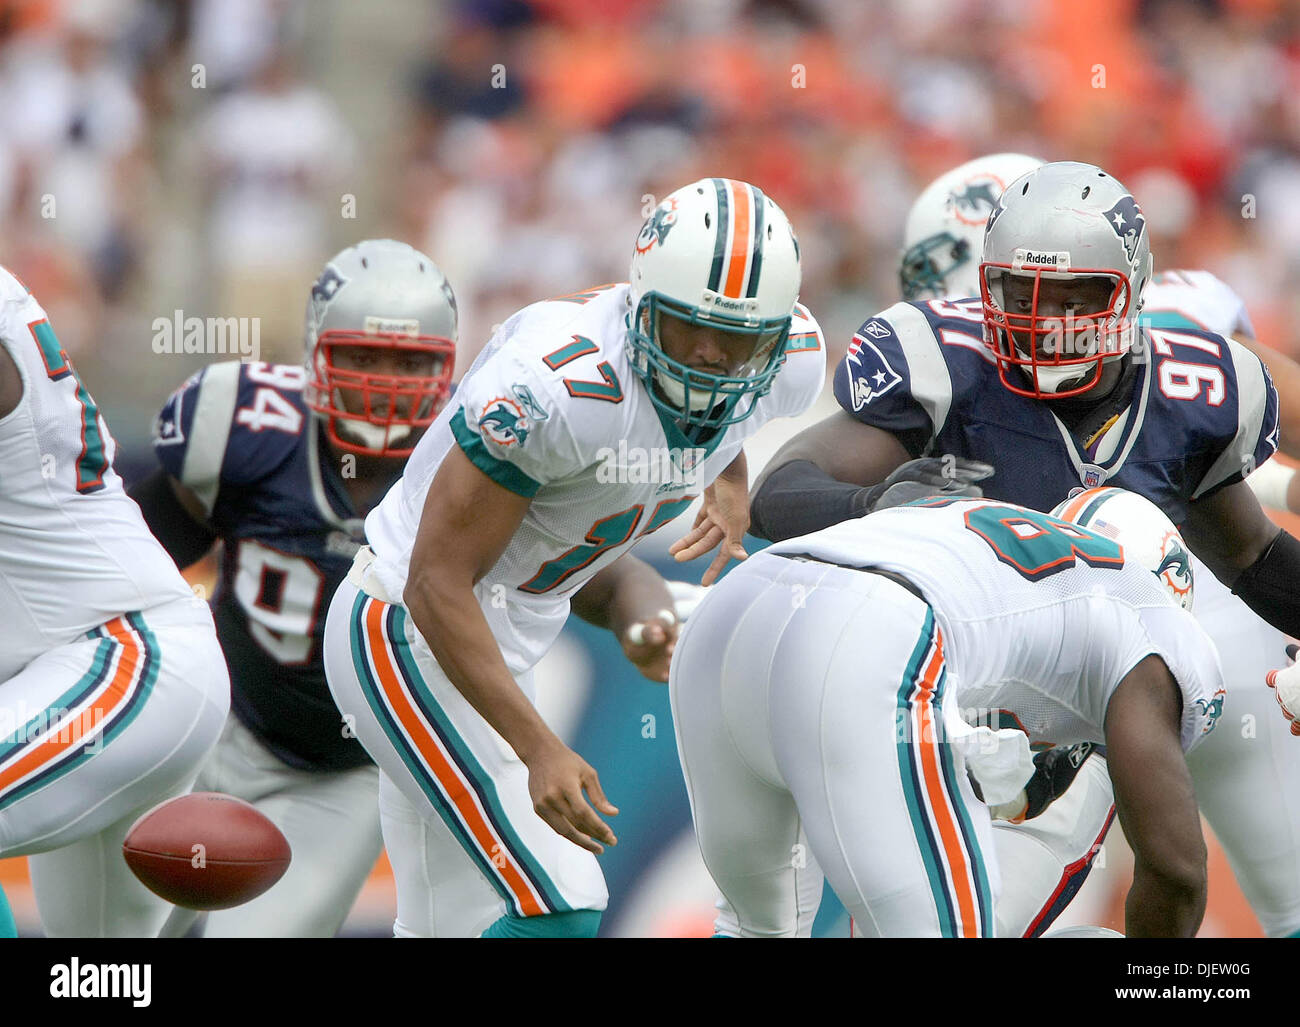 Miami Dolphins quarterback Cleo Lemon (17) fumbles the football in the  first quarter as New England Patriots linebacker Rosevelt Colvin (59) looks  on during a football game at Dolphin Stadium in Miami